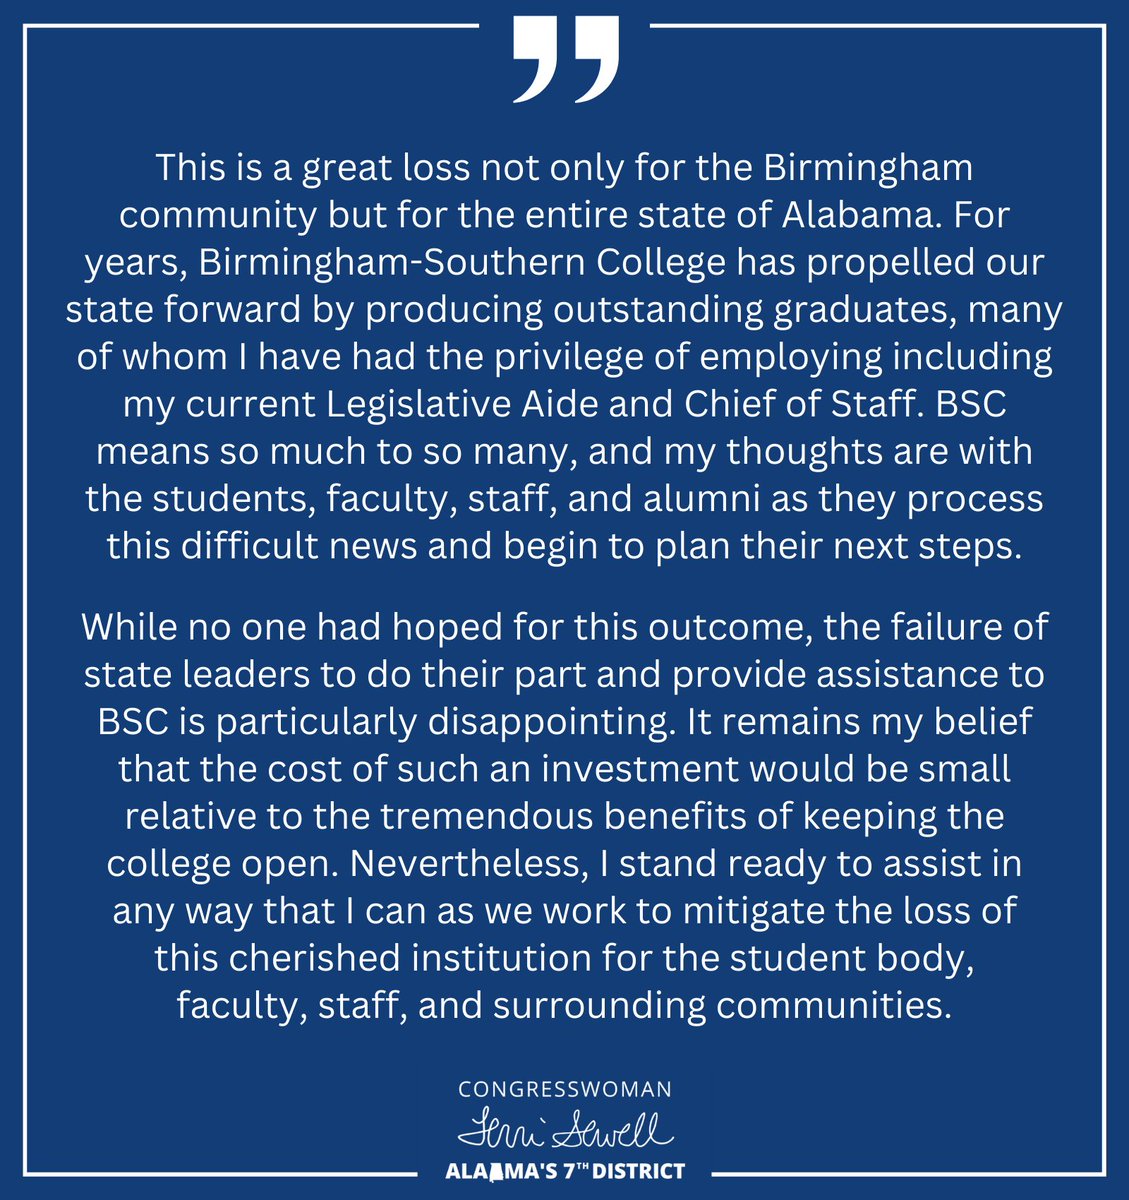 The closure of Birmingham-Southern College will be a great loss not only for the Birmingham community but for the entire state of Alabama. My full statement. ⬇️